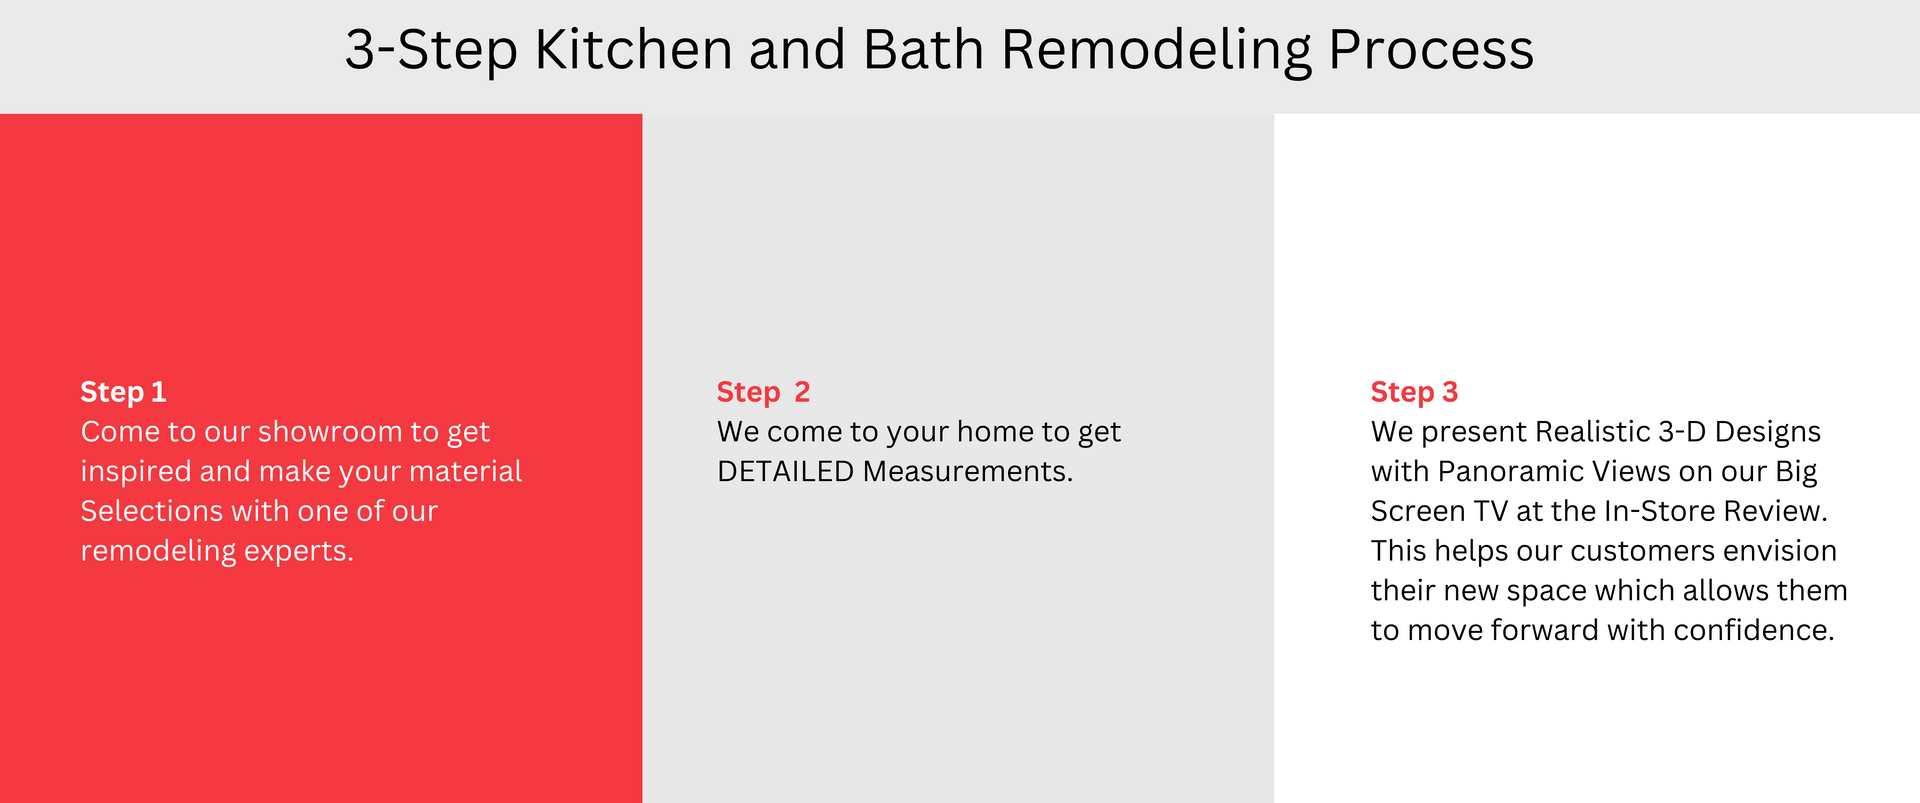 a picture of a 3 step kitchen and bath remodeling process